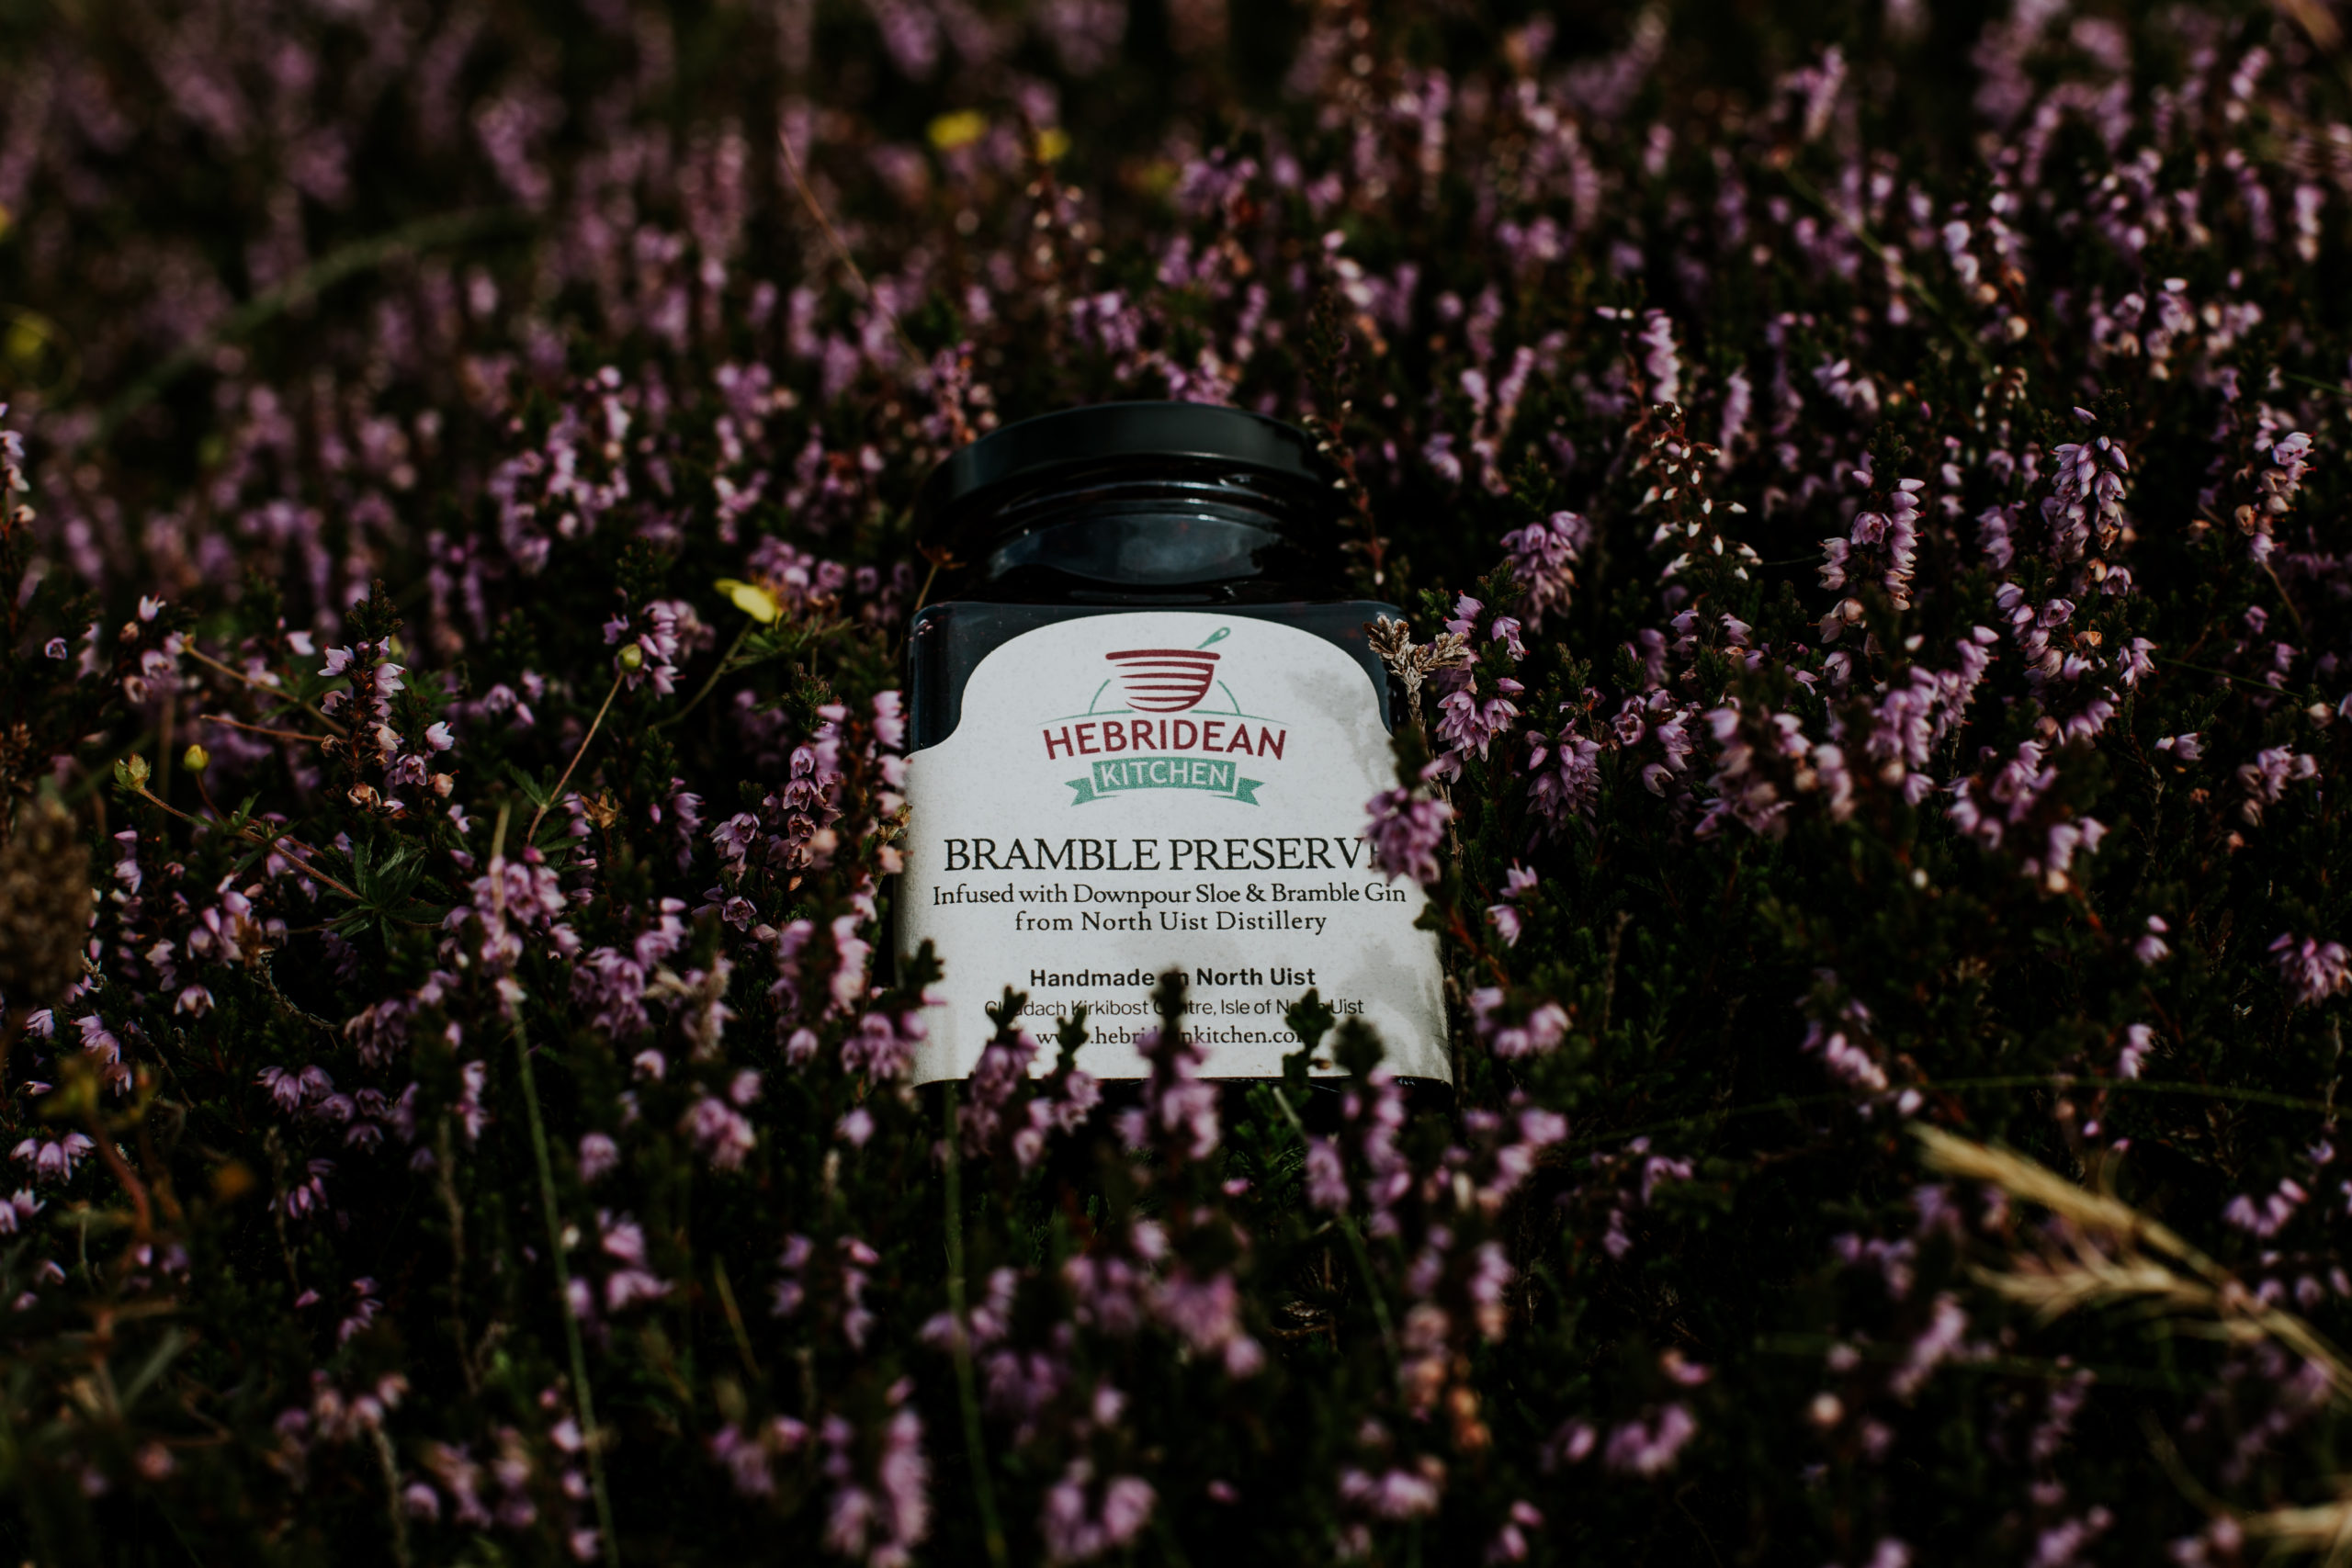 A jar of Claddach Kirkibost Centre Bramble Preserve nestled in some purple heather on the isle of North Uist